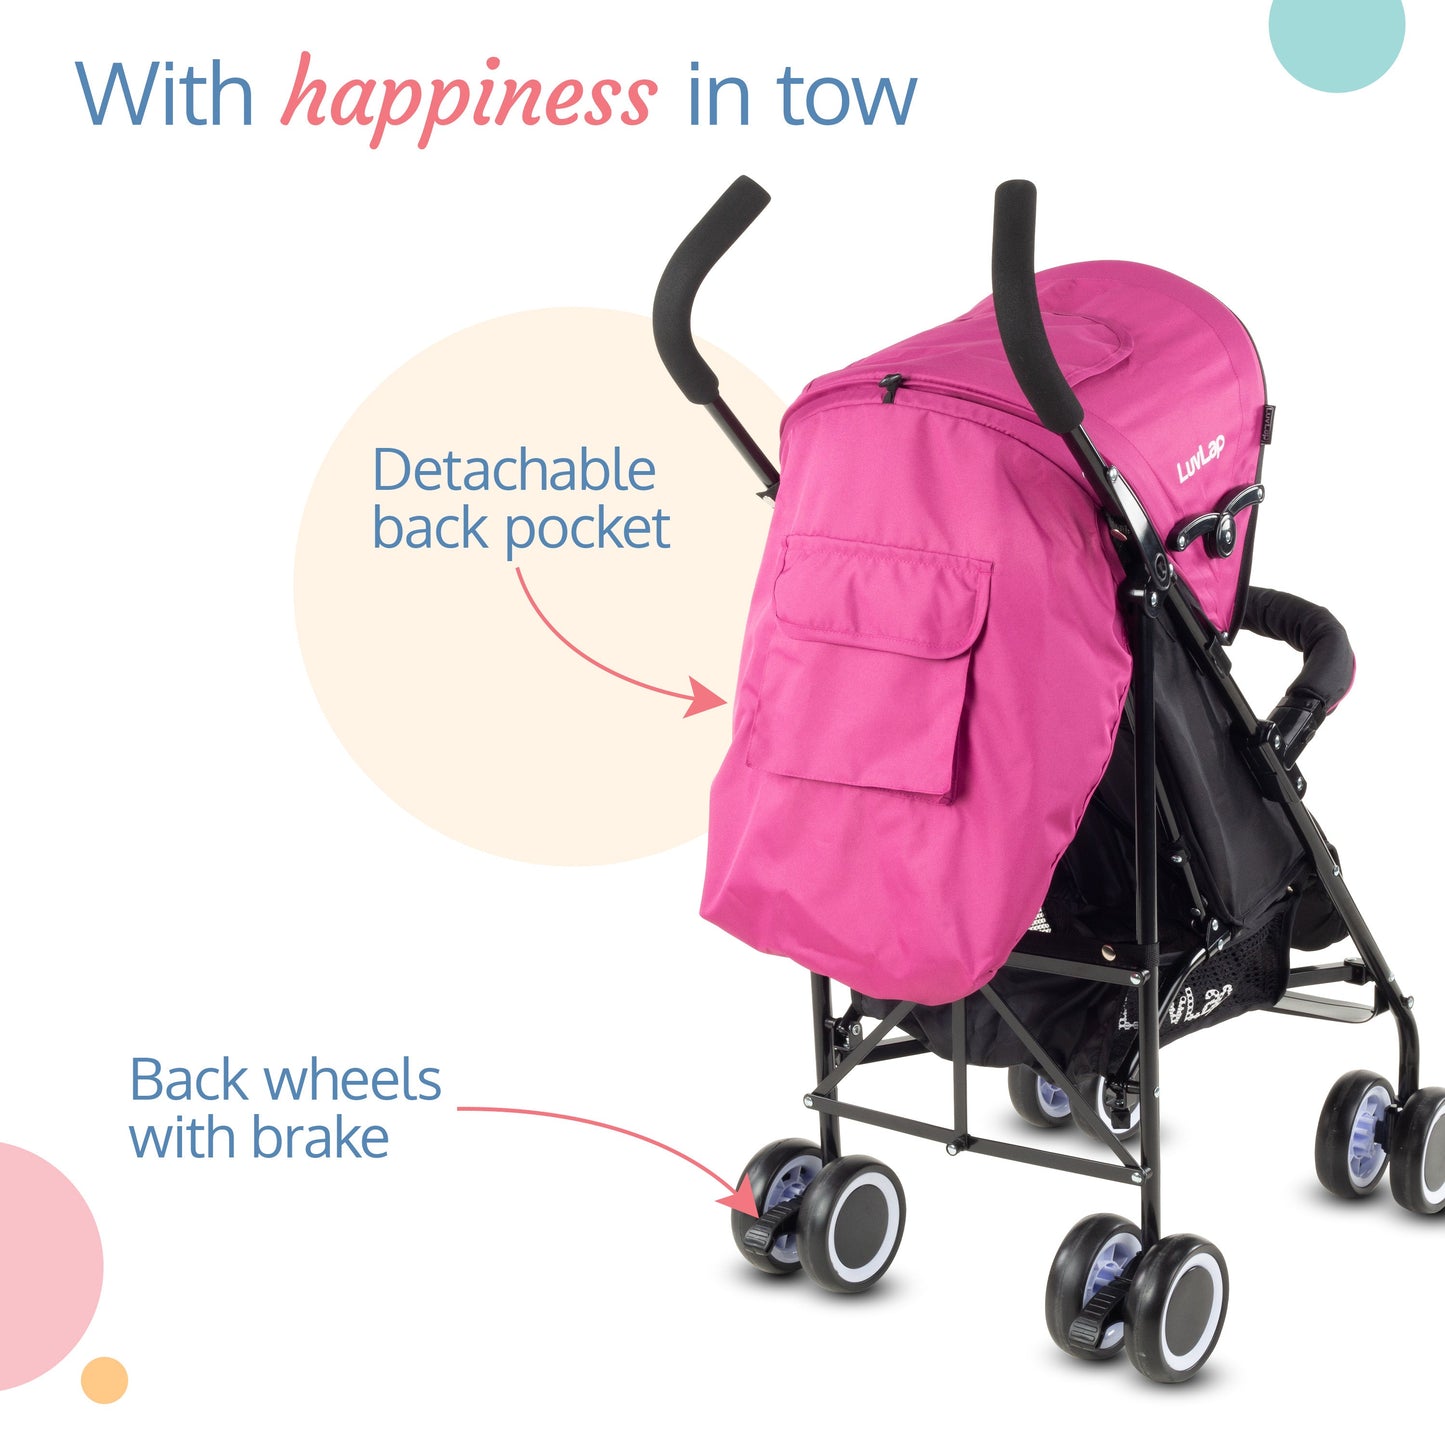 City Baby Stroller Buggy, Pink